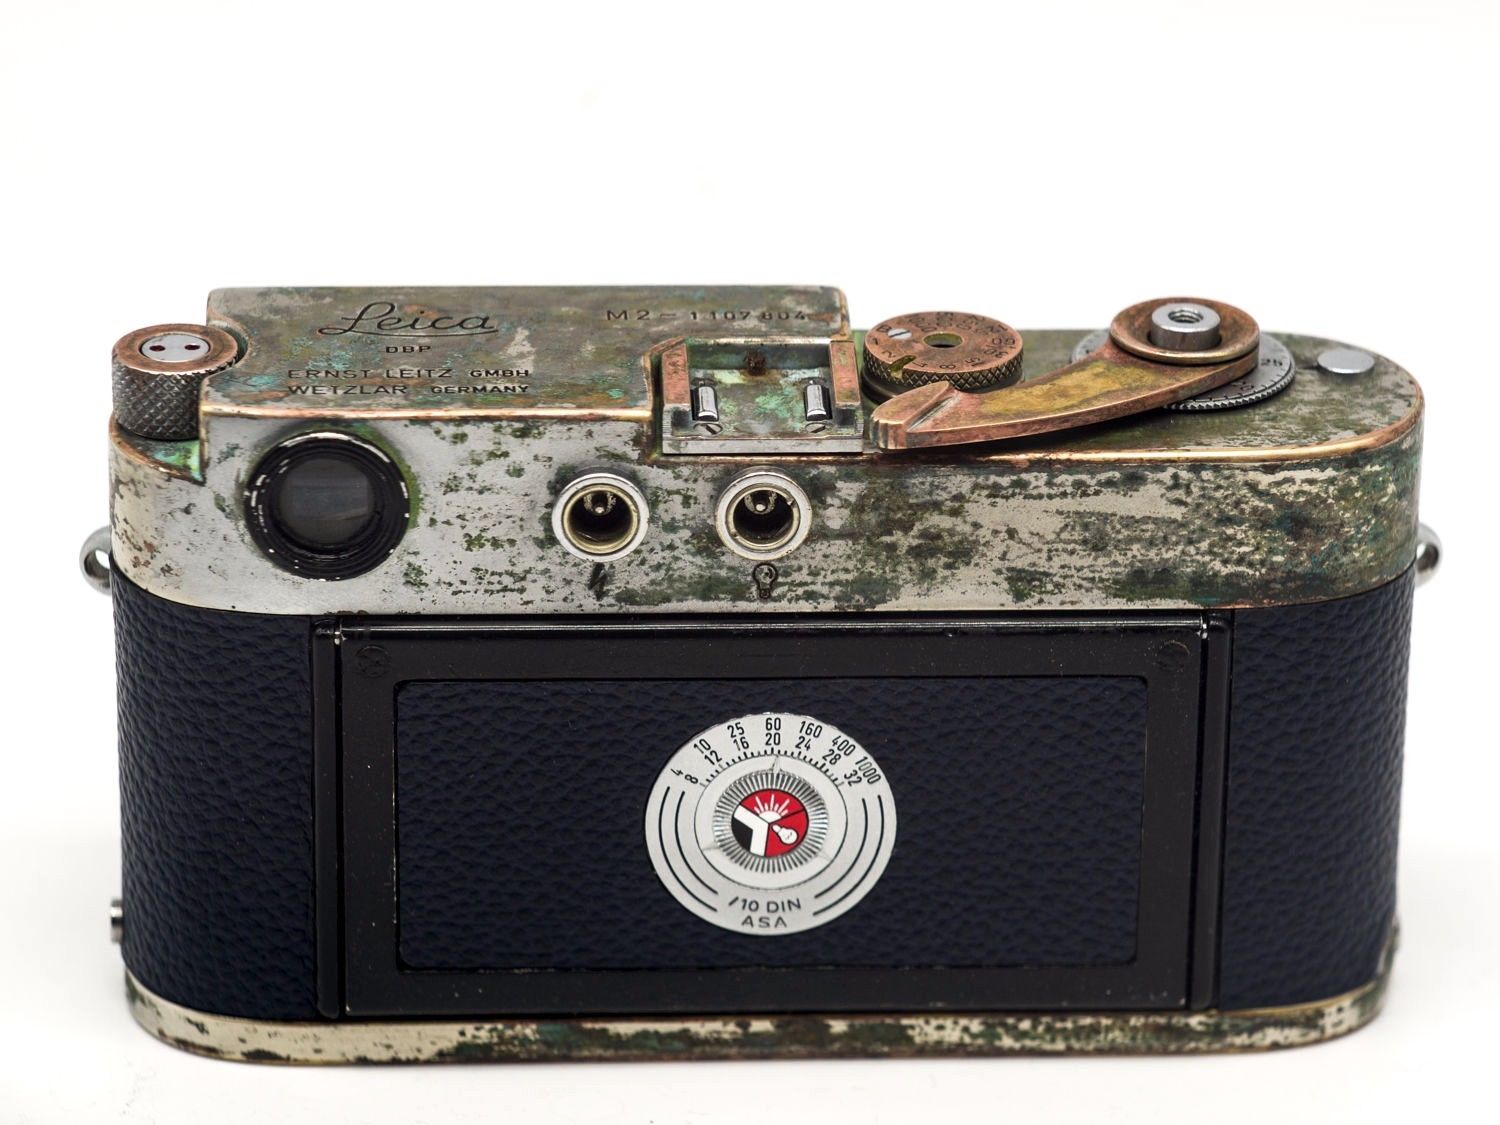 Laat je zien gekruld fluweel This unique "custom refinished" Leica M2 camera can be yours for $1,550 -  Leica Rumors